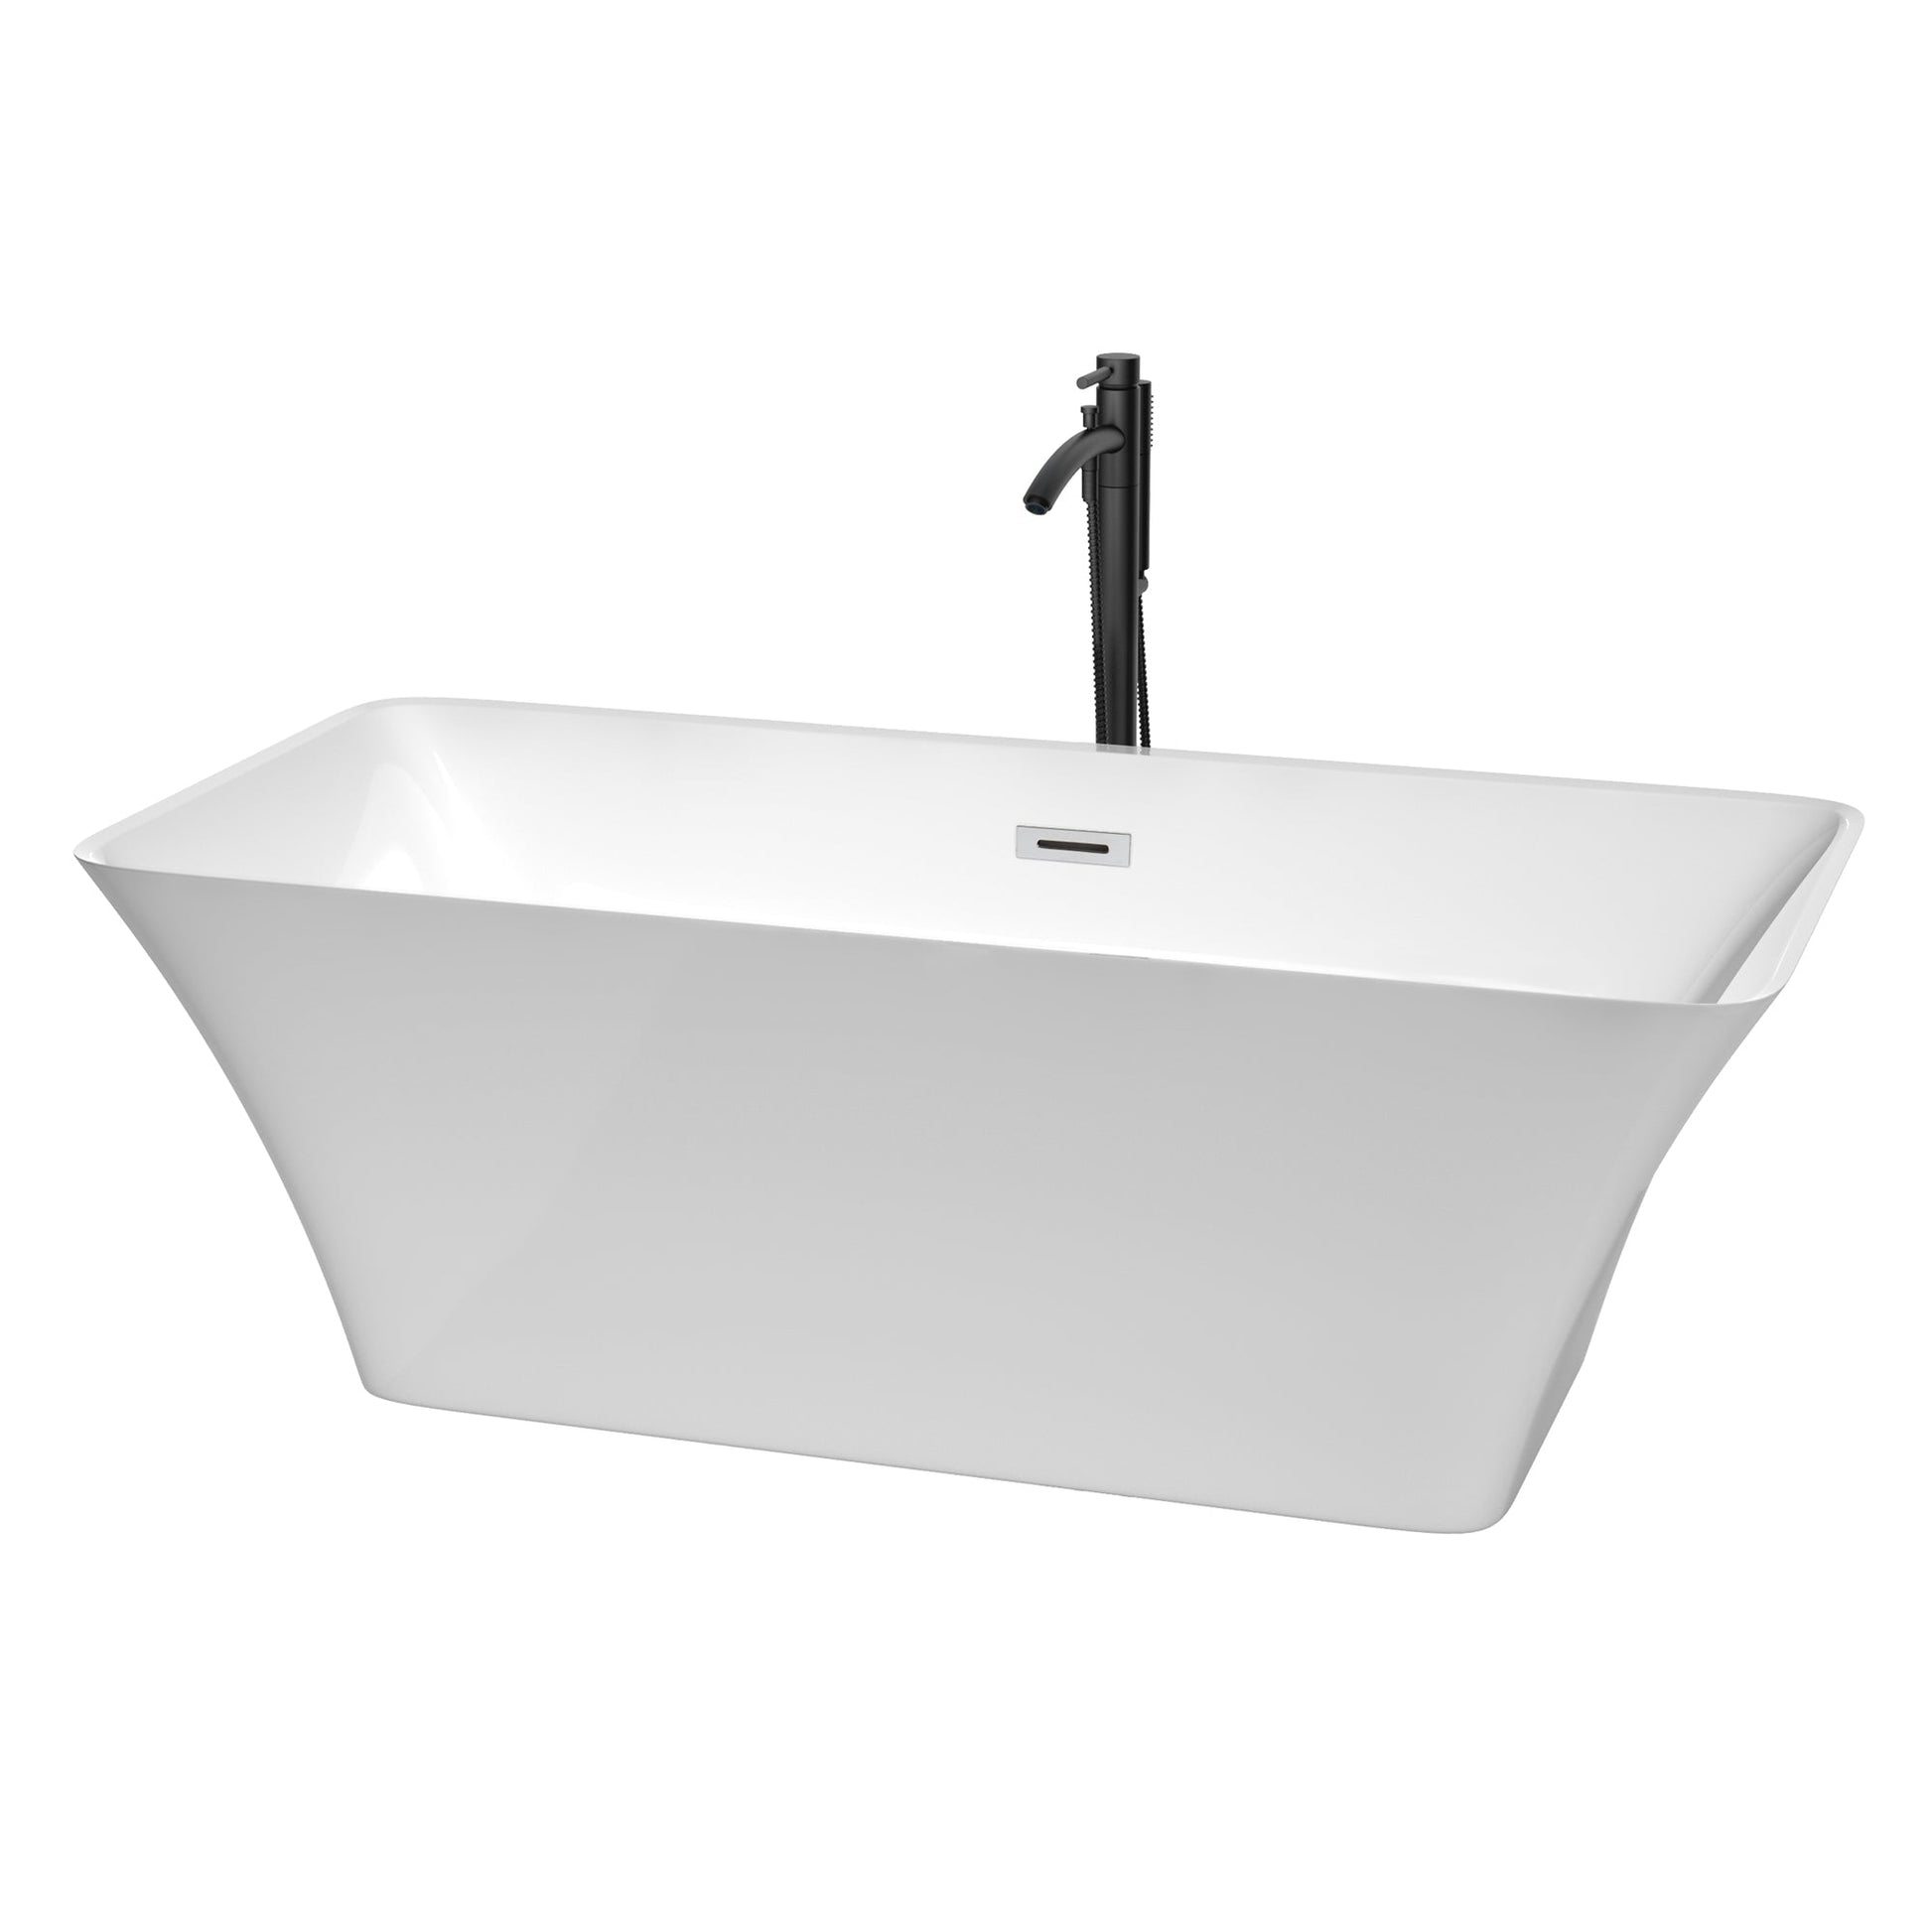 Wyndham Collection Tiffany 67" Freestanding Bathtub in White With Polished Chrome Trim and Floor Mounted Faucet in Matte Black